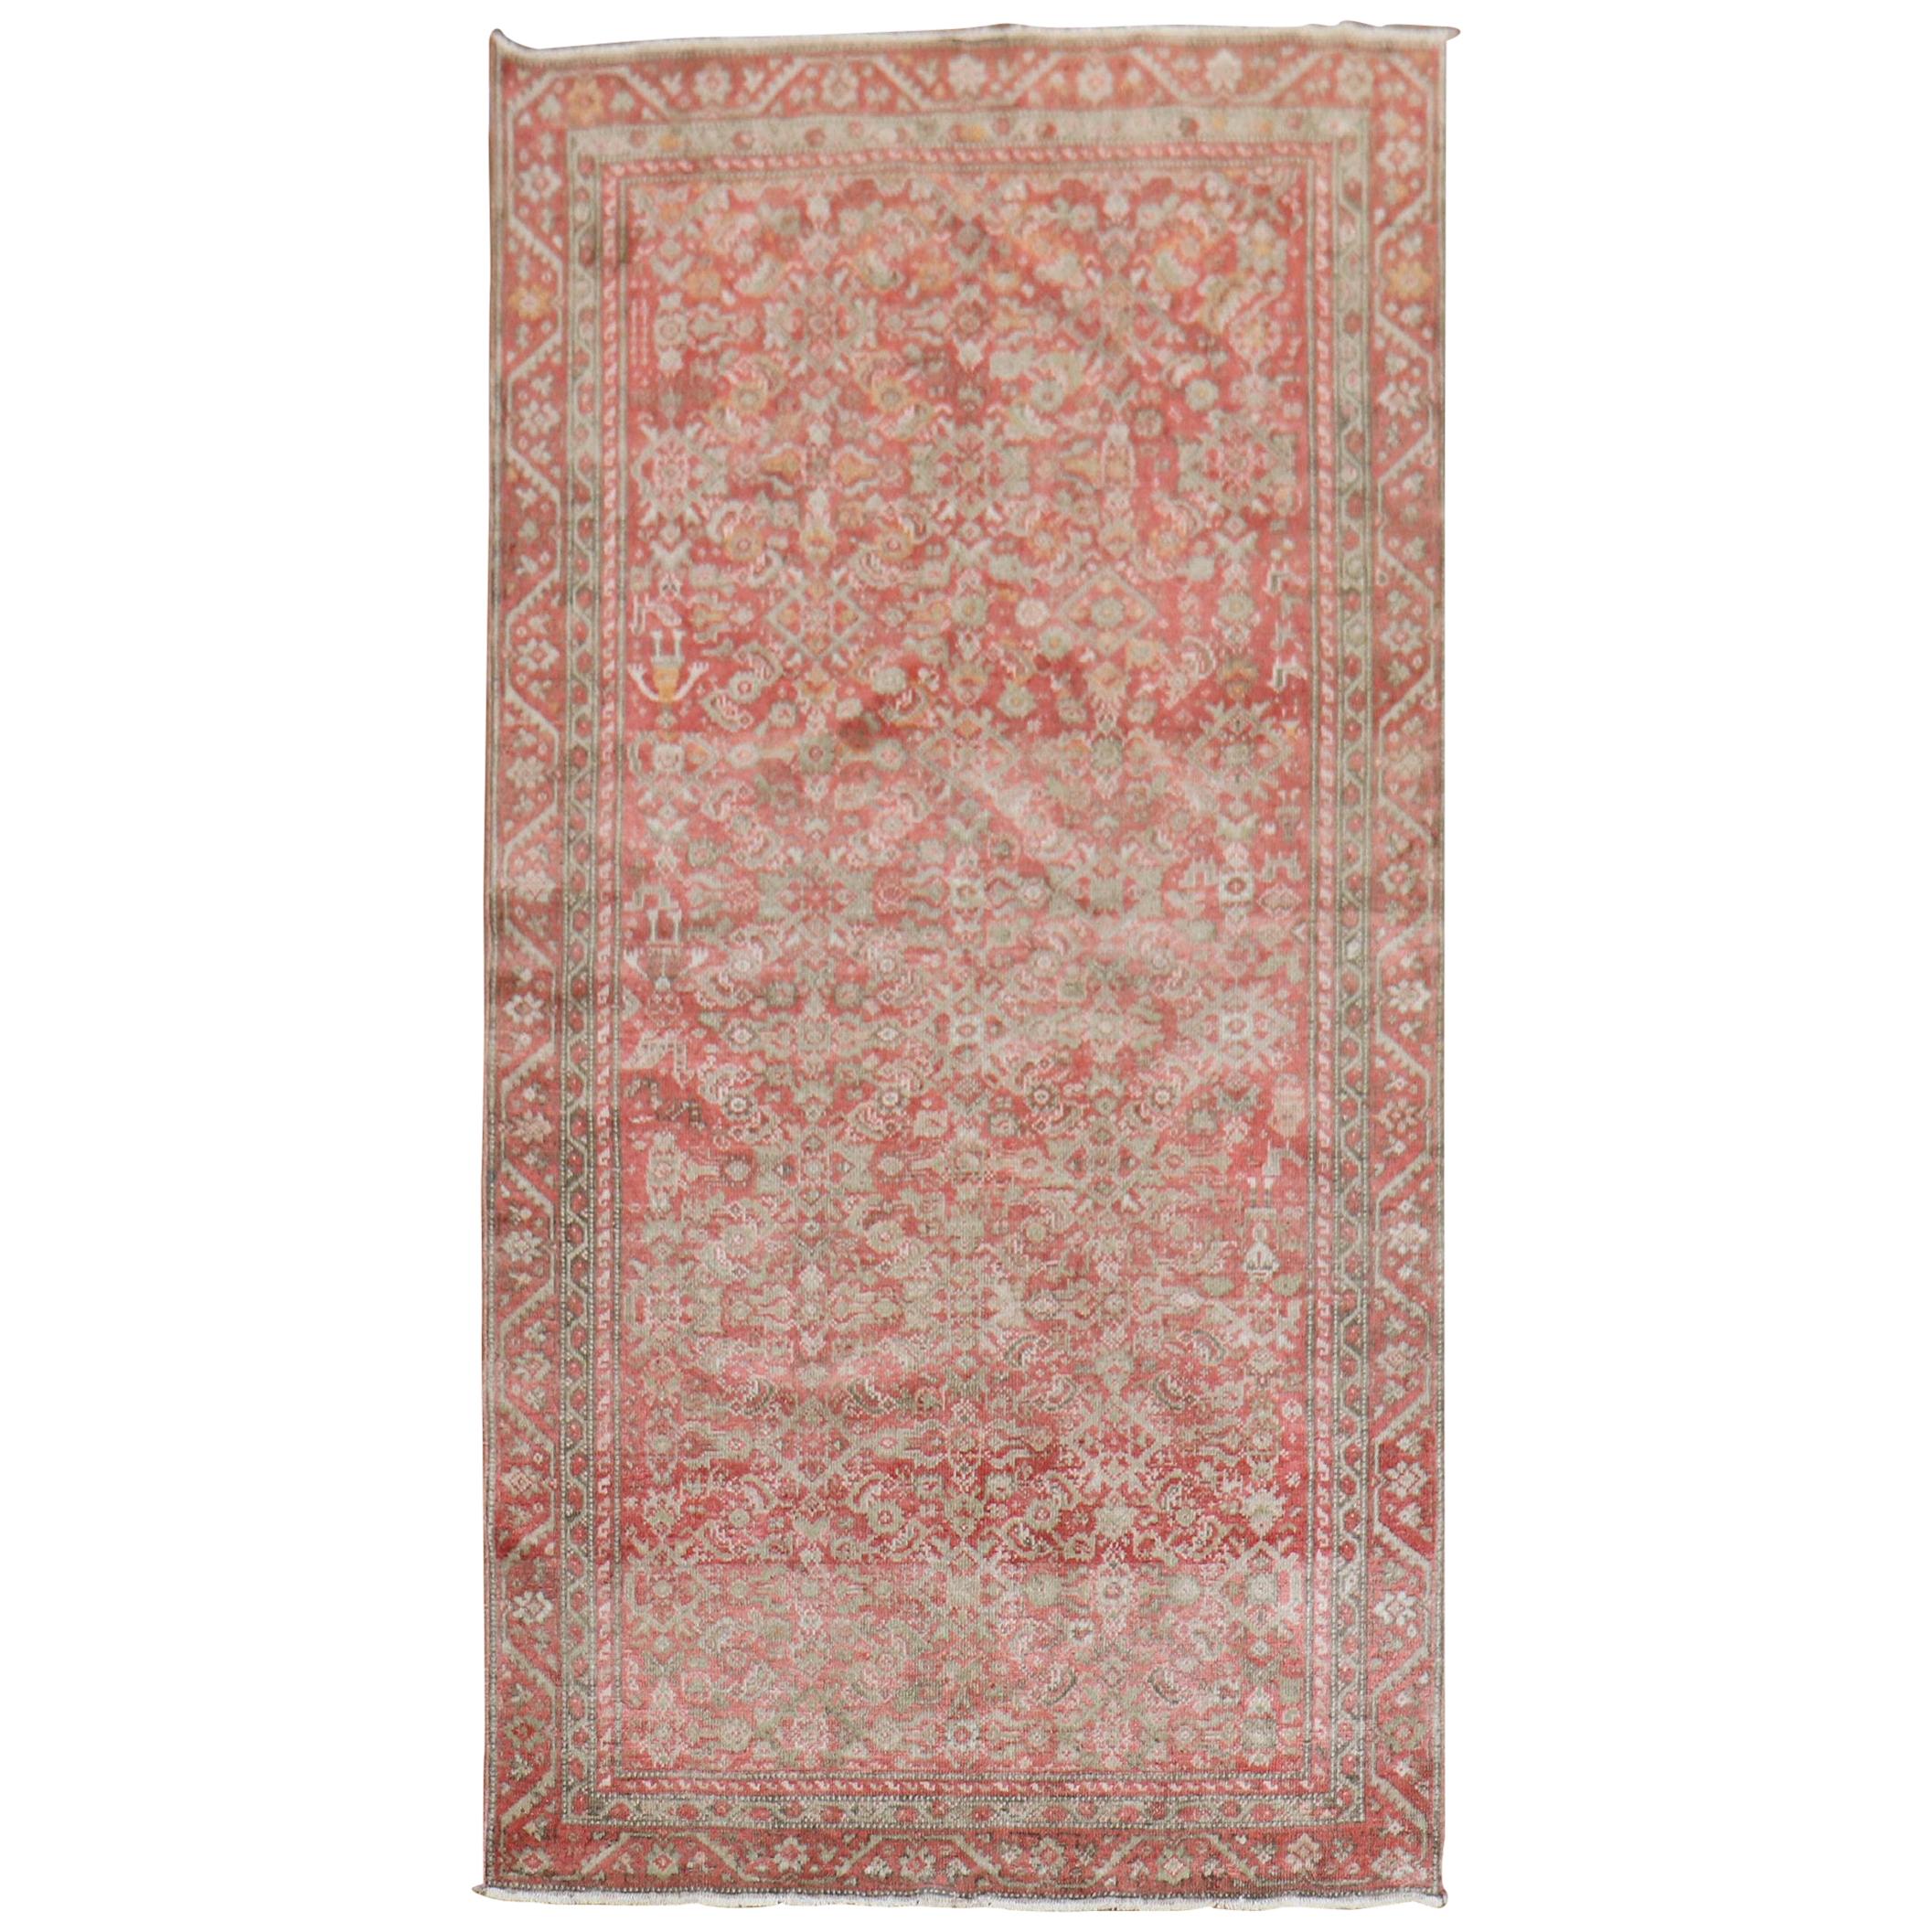 Tapis persan traditionnel Malayer rose et rouge